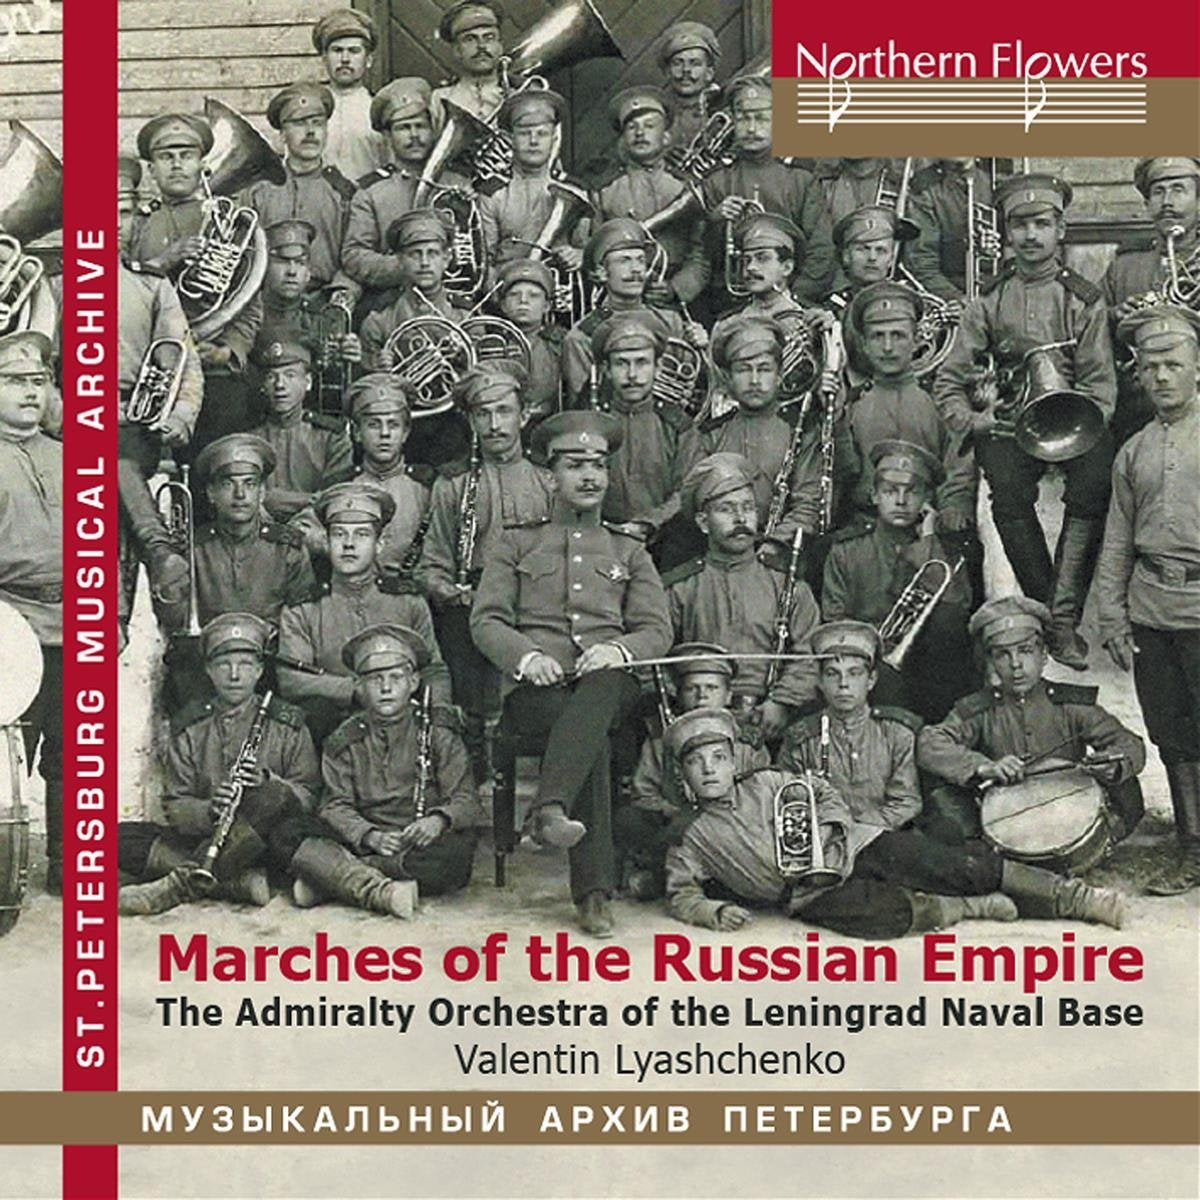 MARCHES OF THE RUSSIAN EMPIRE - ADMIRALTY BAND OF THE LENINGRAD NAVAL BASE